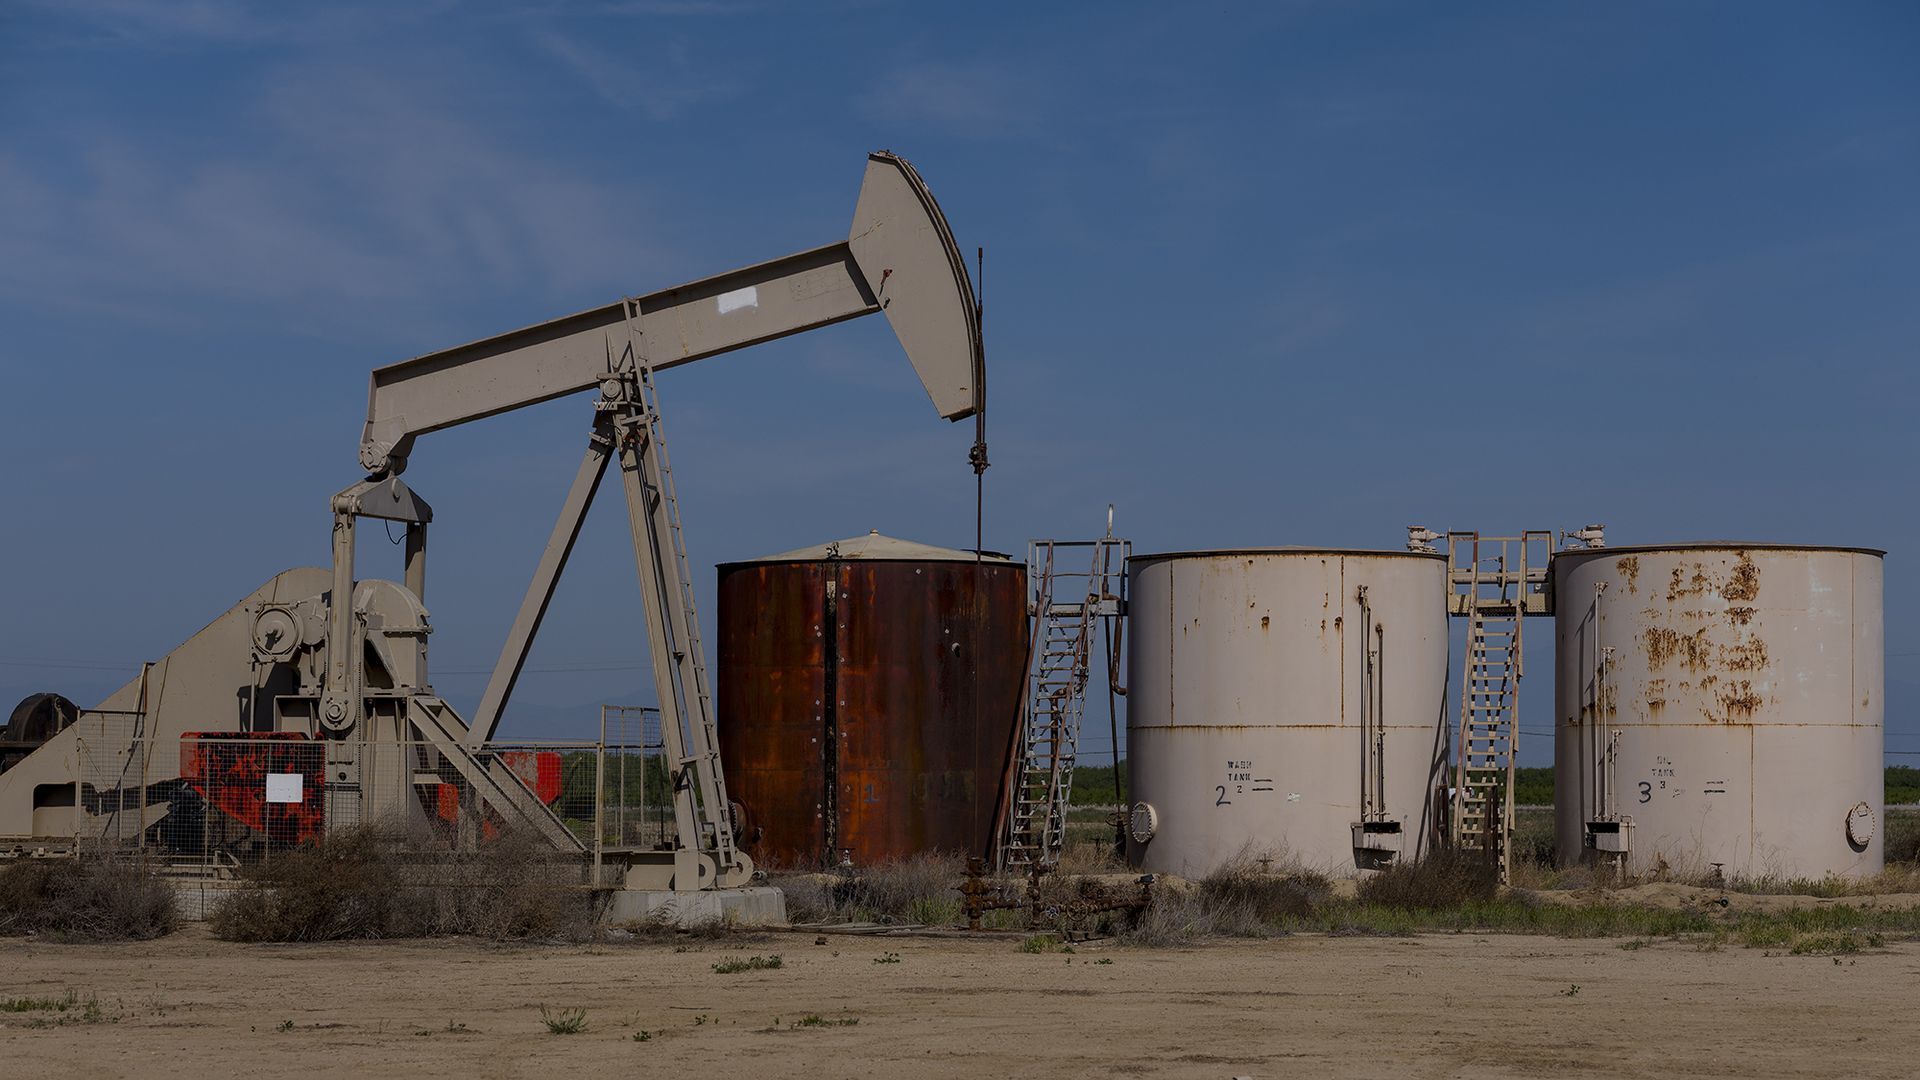 : An orphan oil well, for which no one is taking legal or financial responsibility, sits abandoned in Kern County outside of Bakersfield, California.